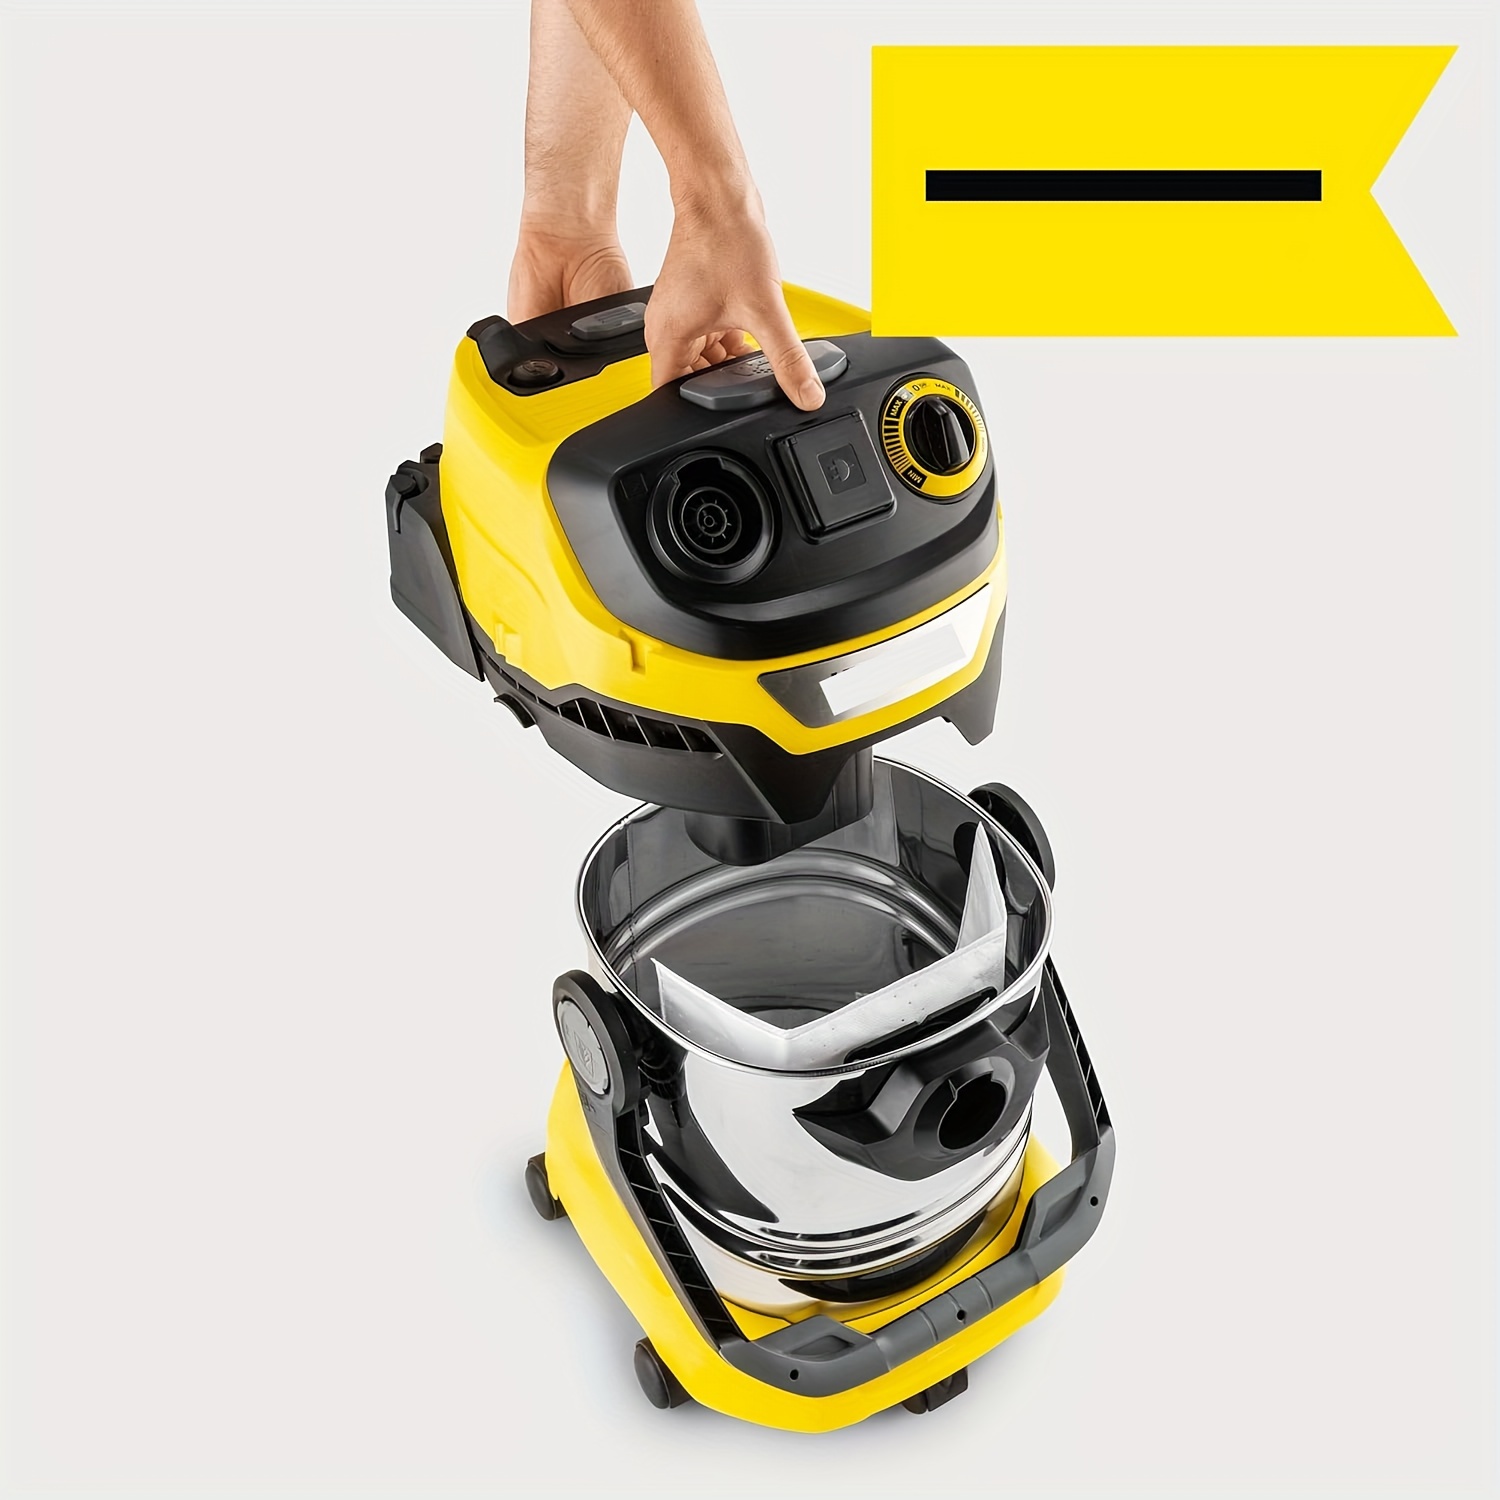 Karcher WD5 Wet/Dry Vac Review